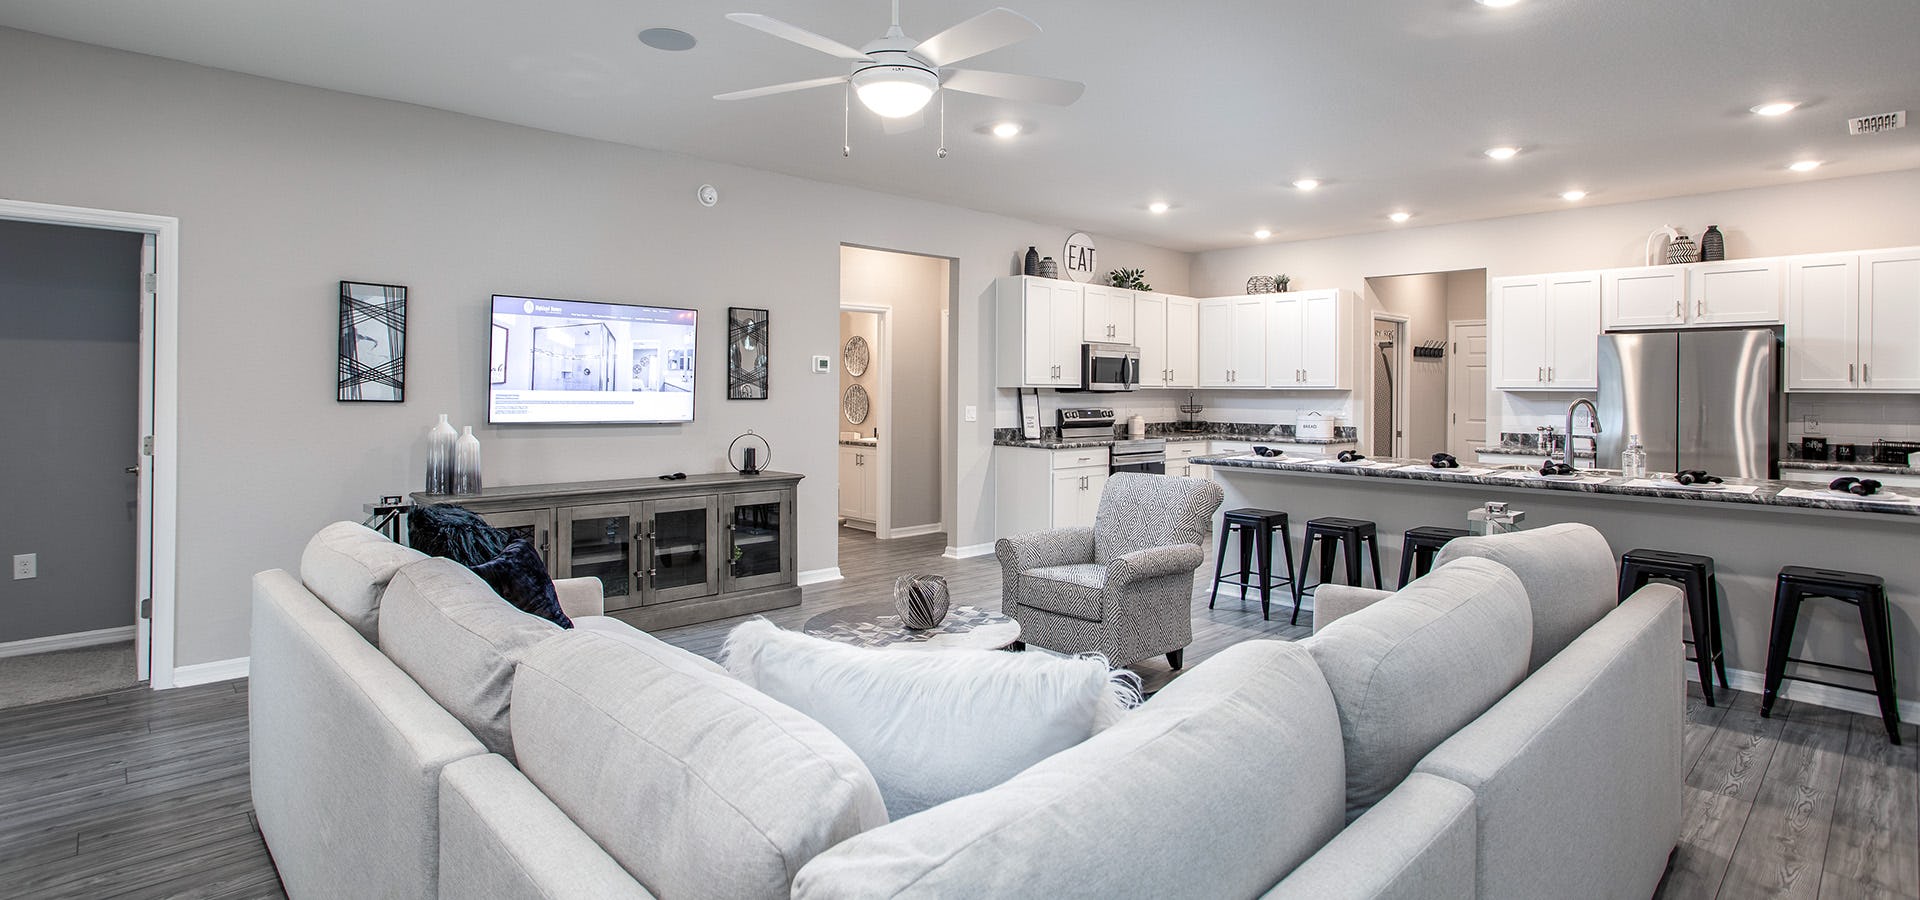 Living area in the new model home in Winter Haven